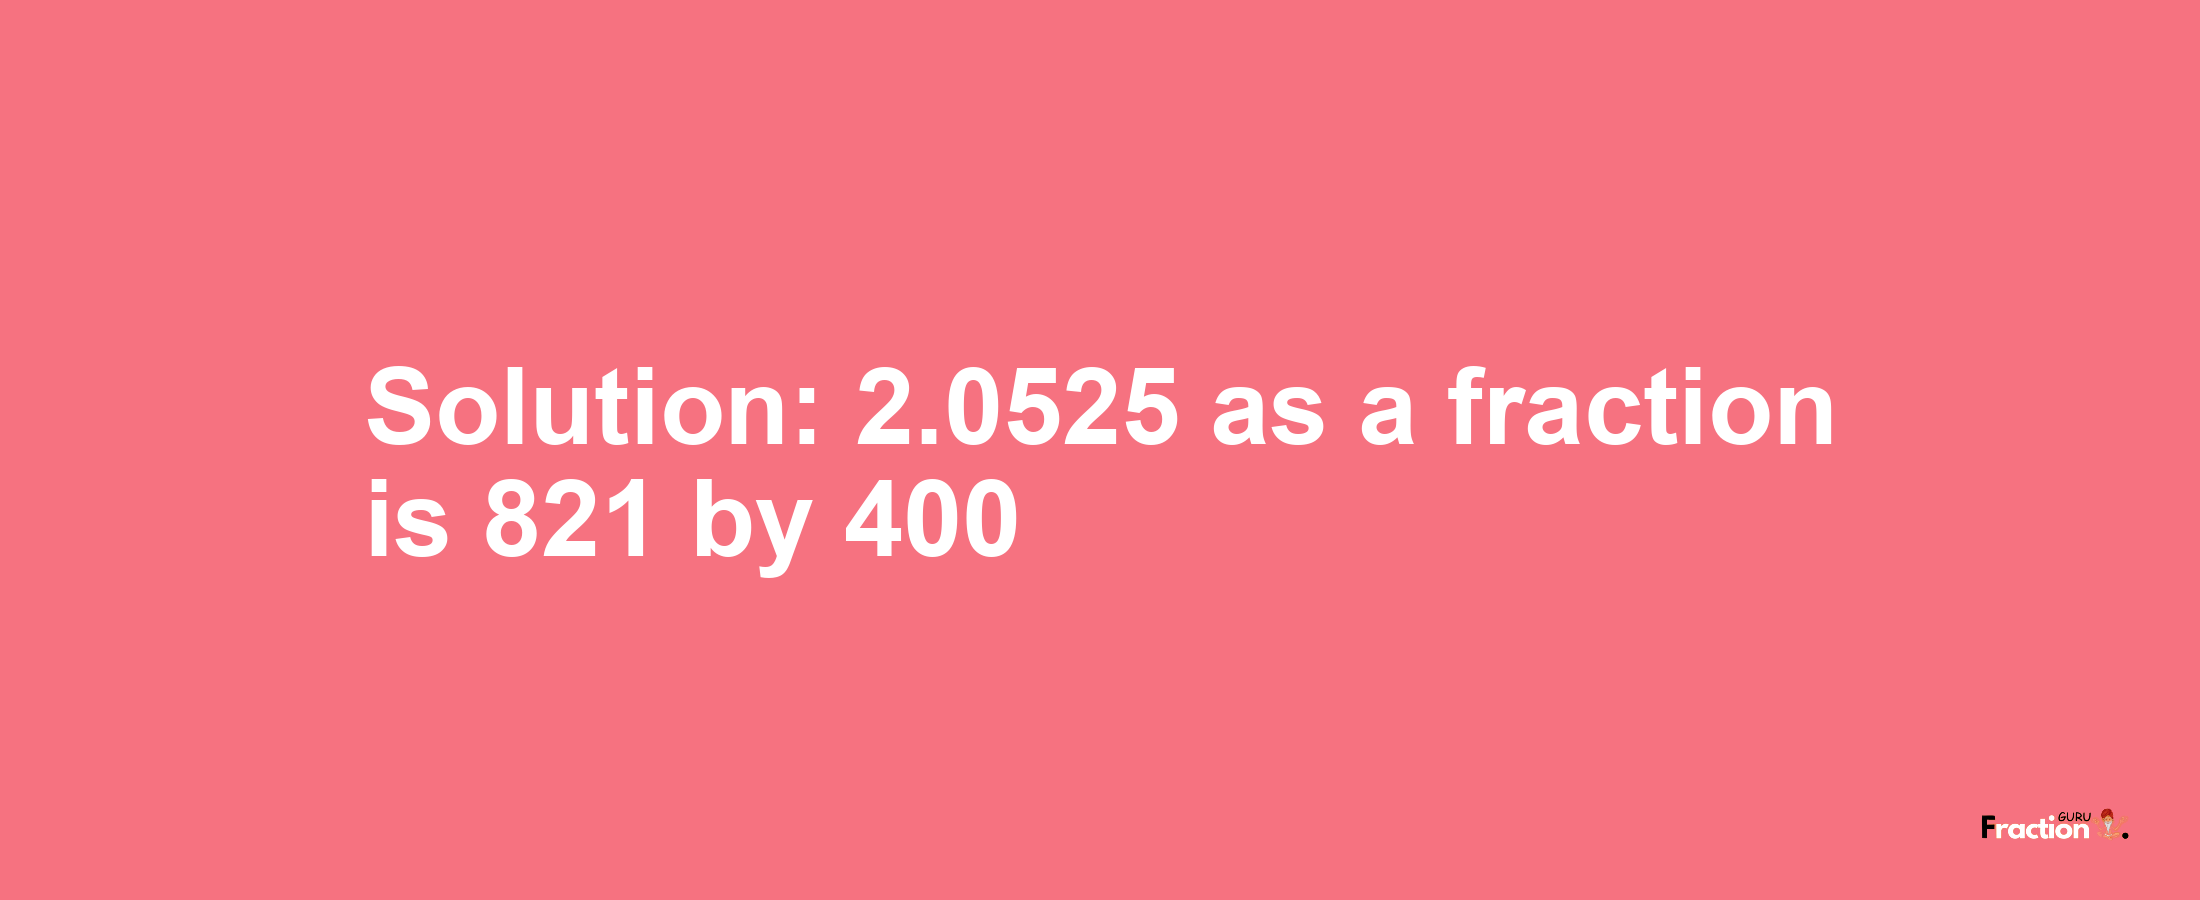 Solution:2.0525 as a fraction is 821/400